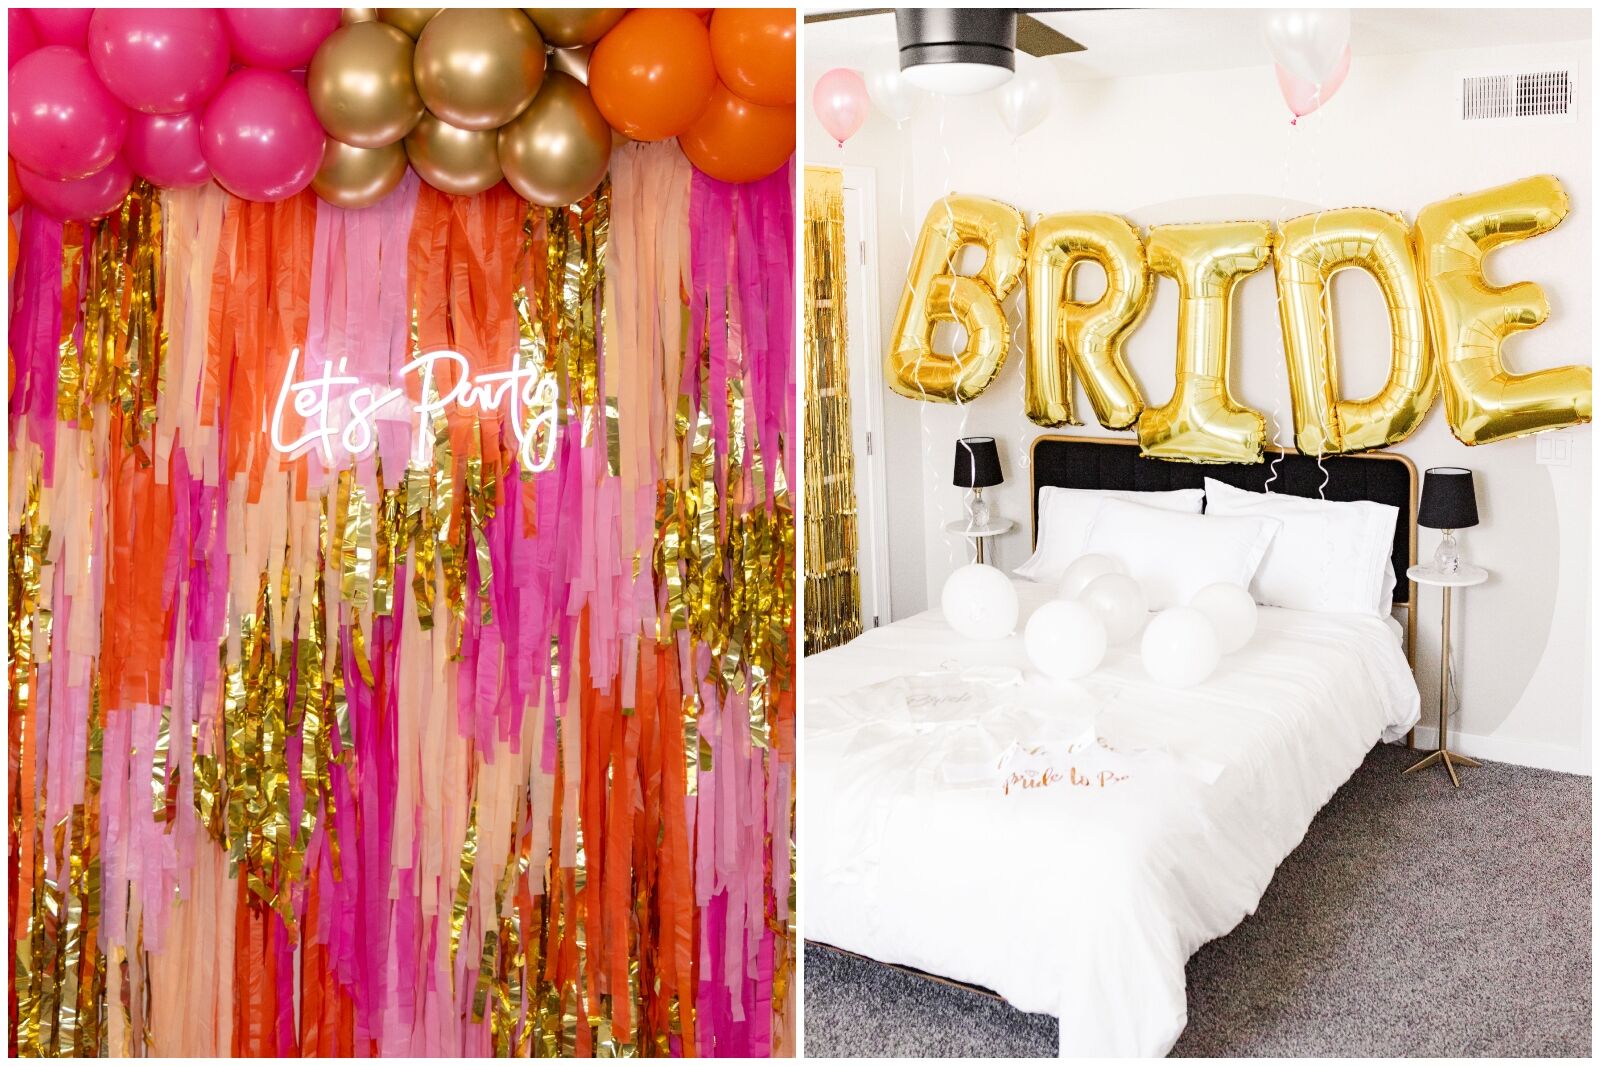 Houses decorated for scottsdale bachelorette